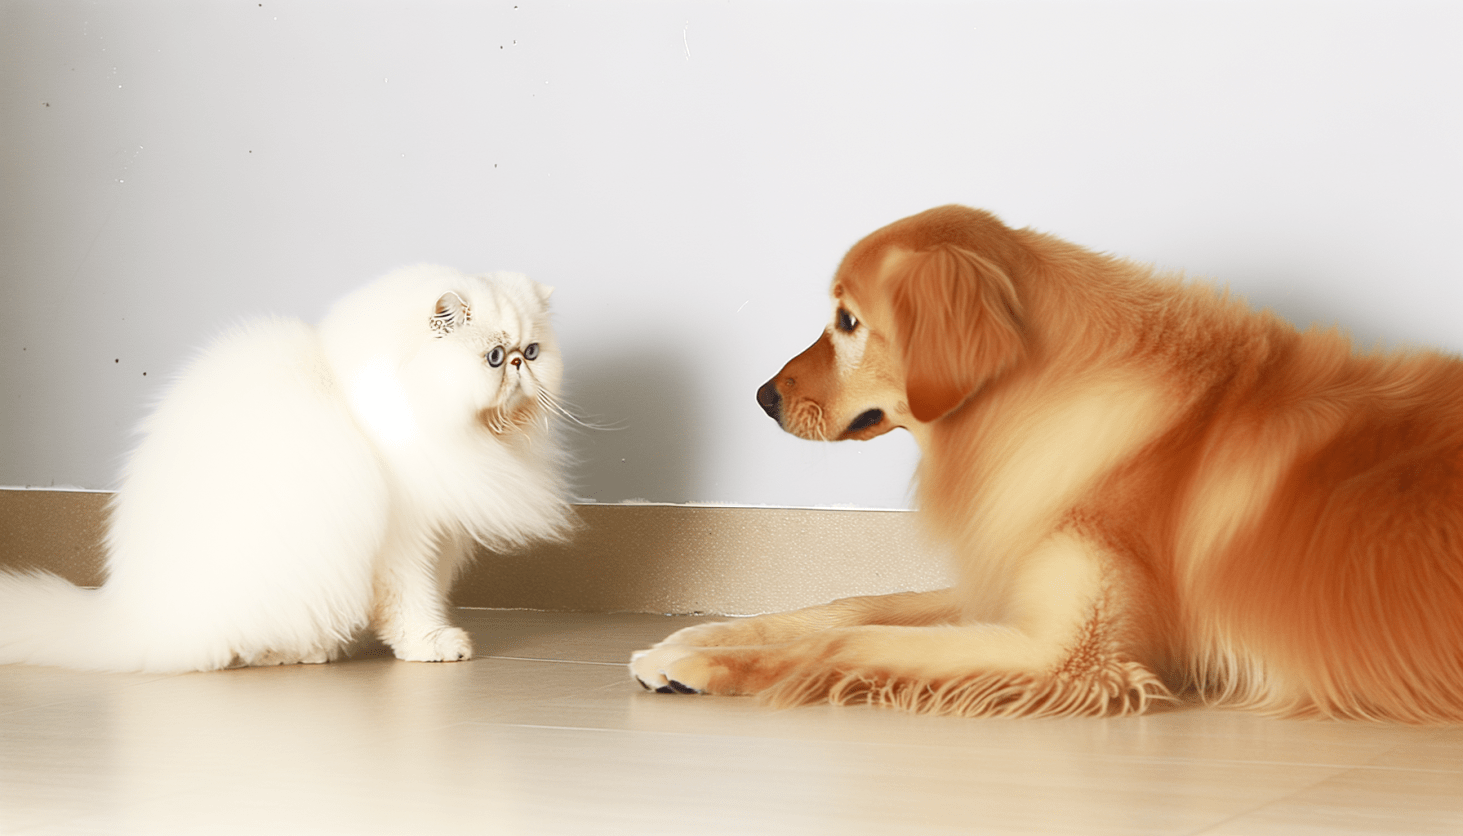 A gradual introduction scene between two pets in a neutral environment.